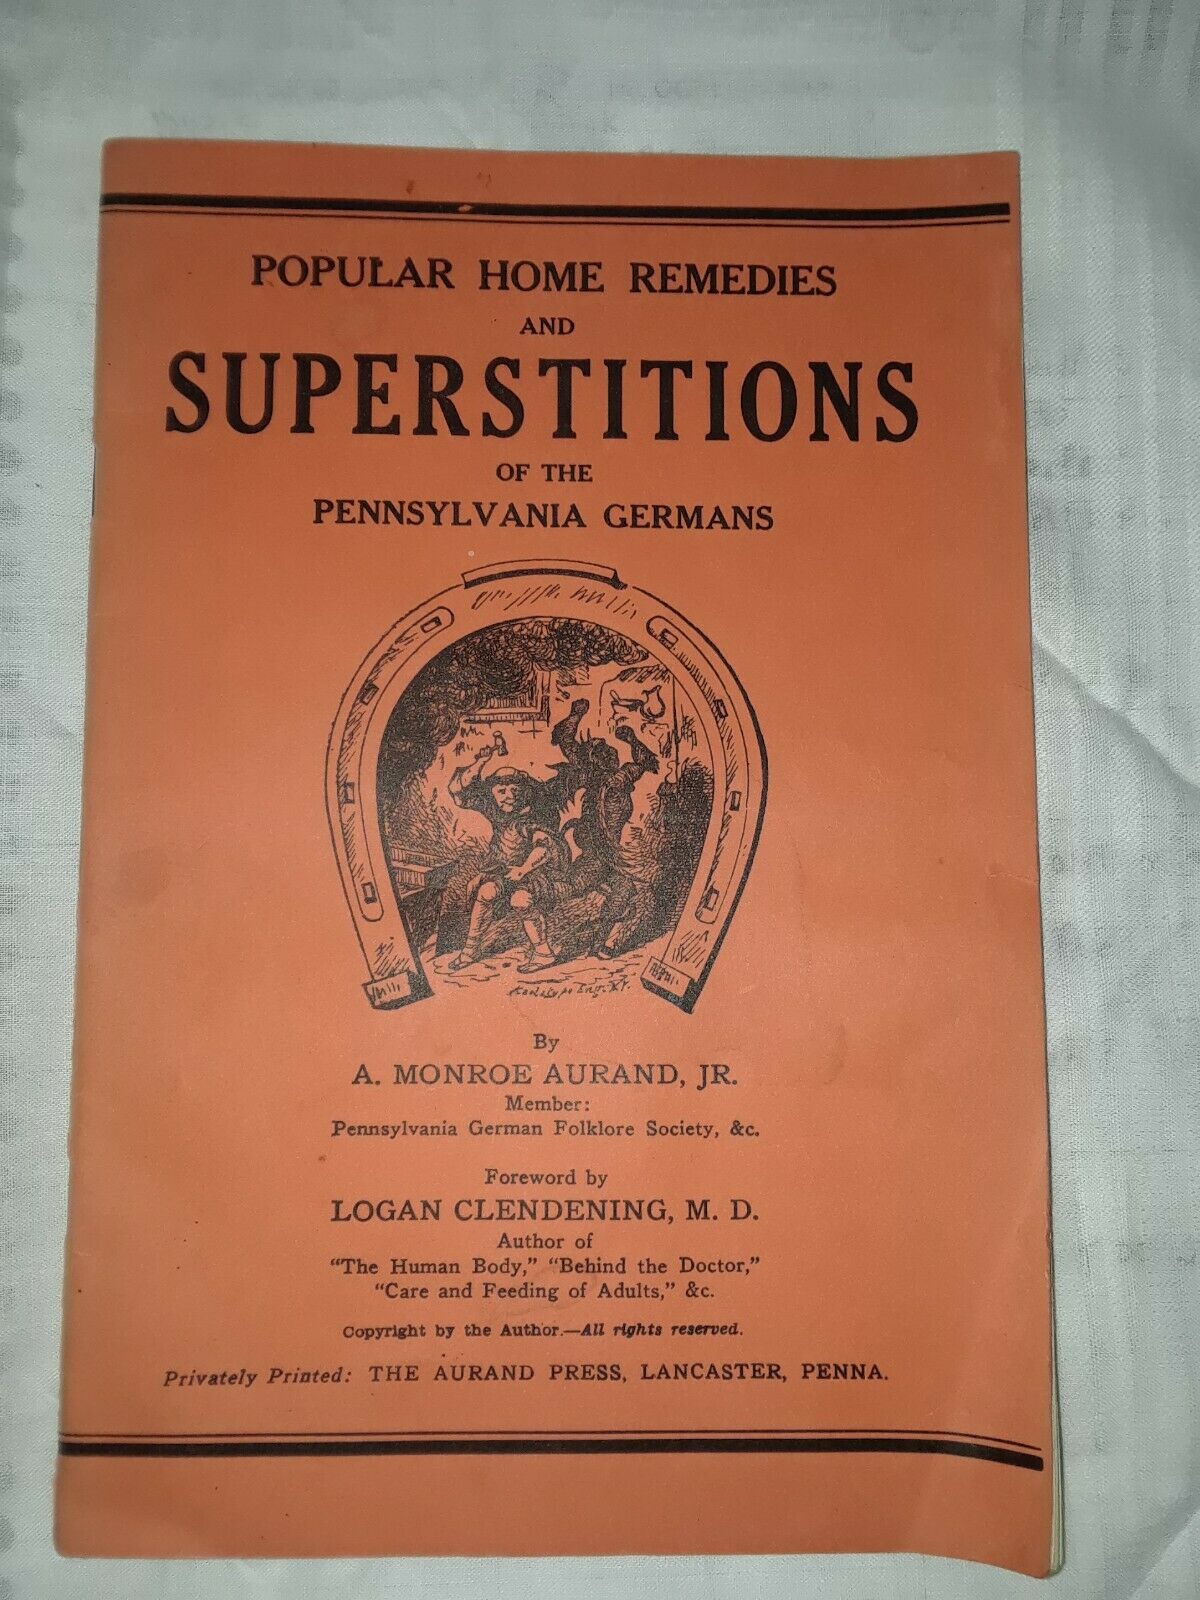 Vintage Popular Home Remedies & Superstitions Of The Pennsylvania Germans